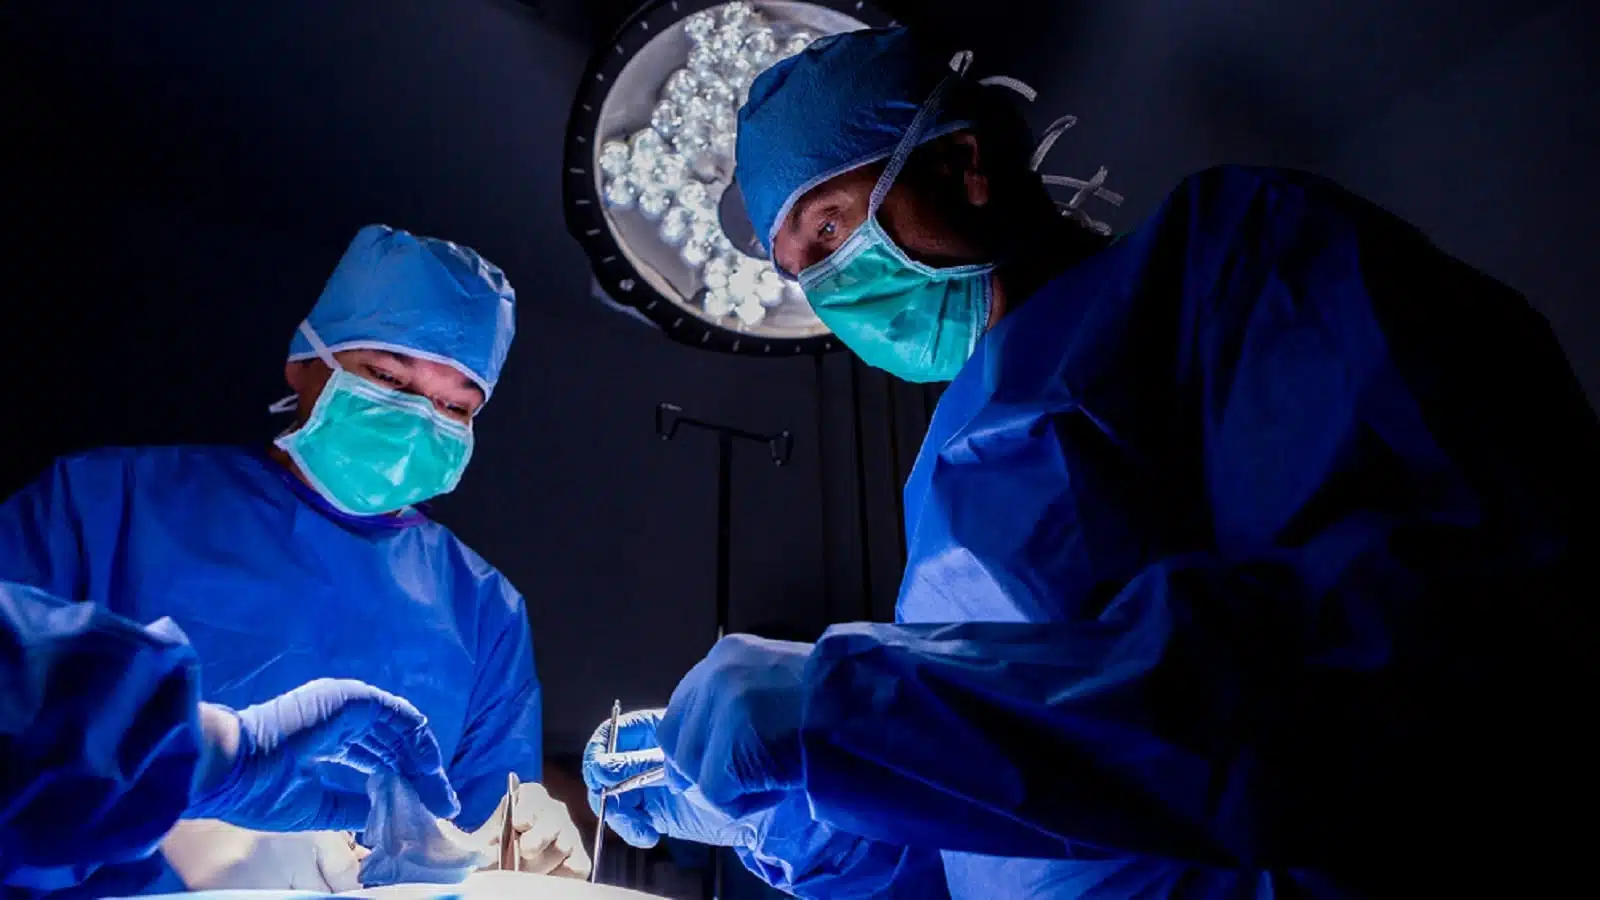 Surgeons Performing Surgery In The Operating Room